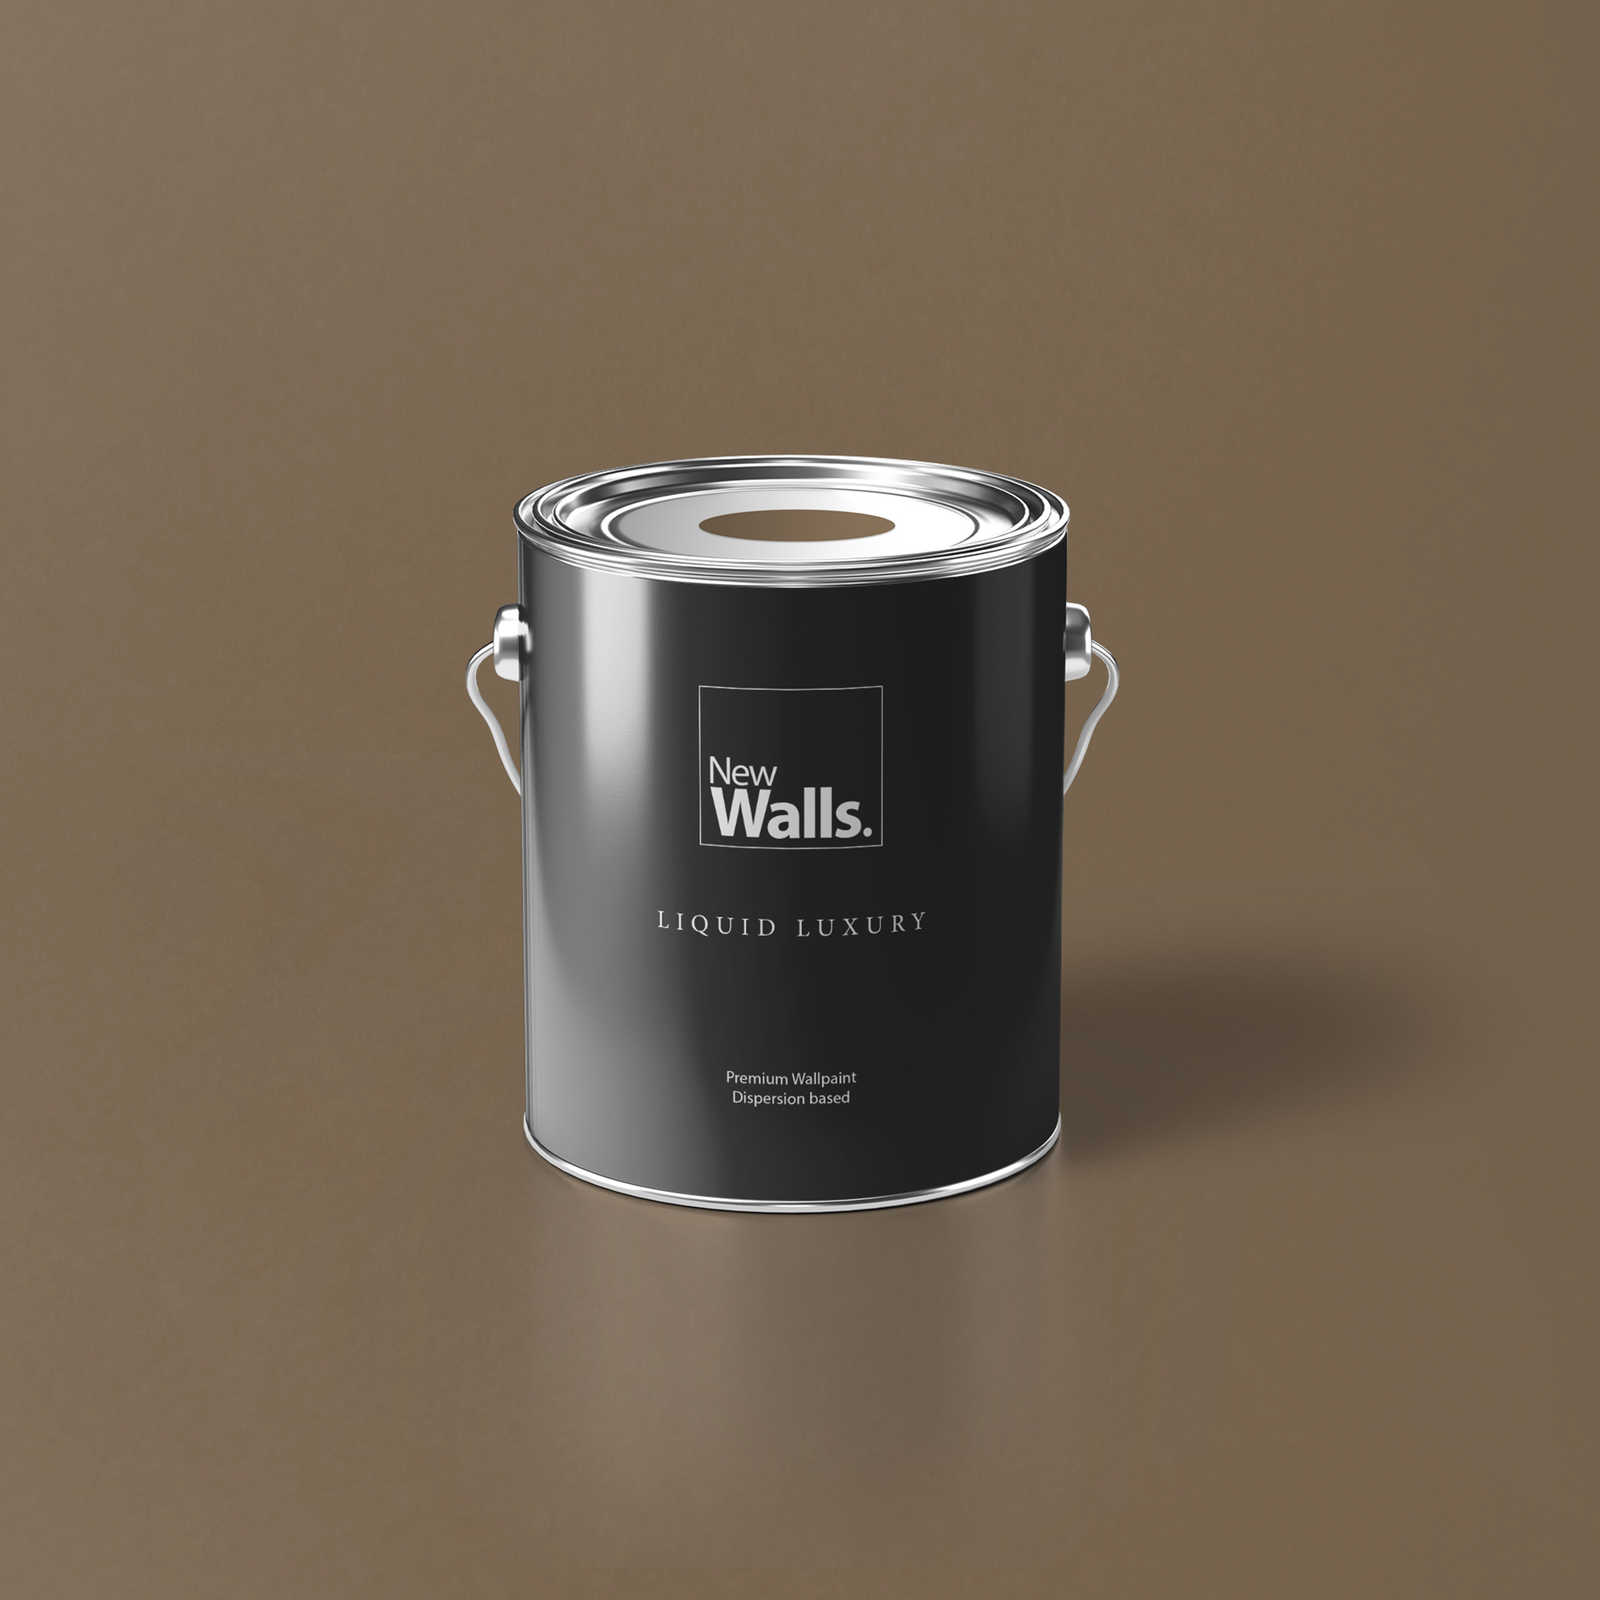 Premium Wall Paint Soothing Brown »Essential Earth« NW711 – 2.5 litre
